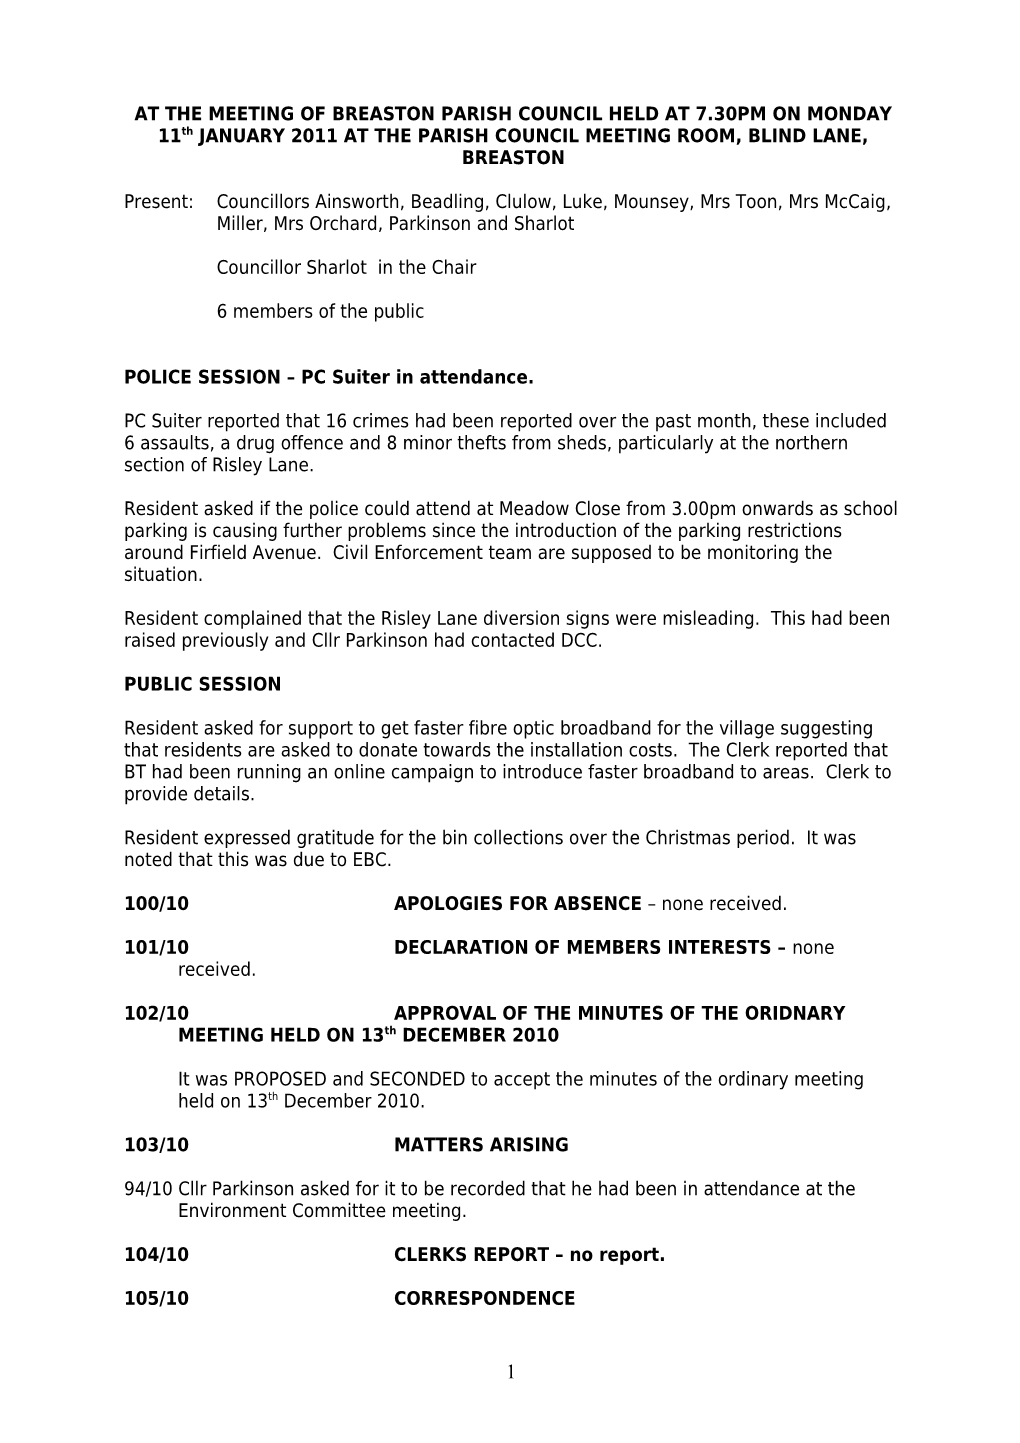 Minutes of the Annual Parish Meeting of Breaston Parish Council Held at 7